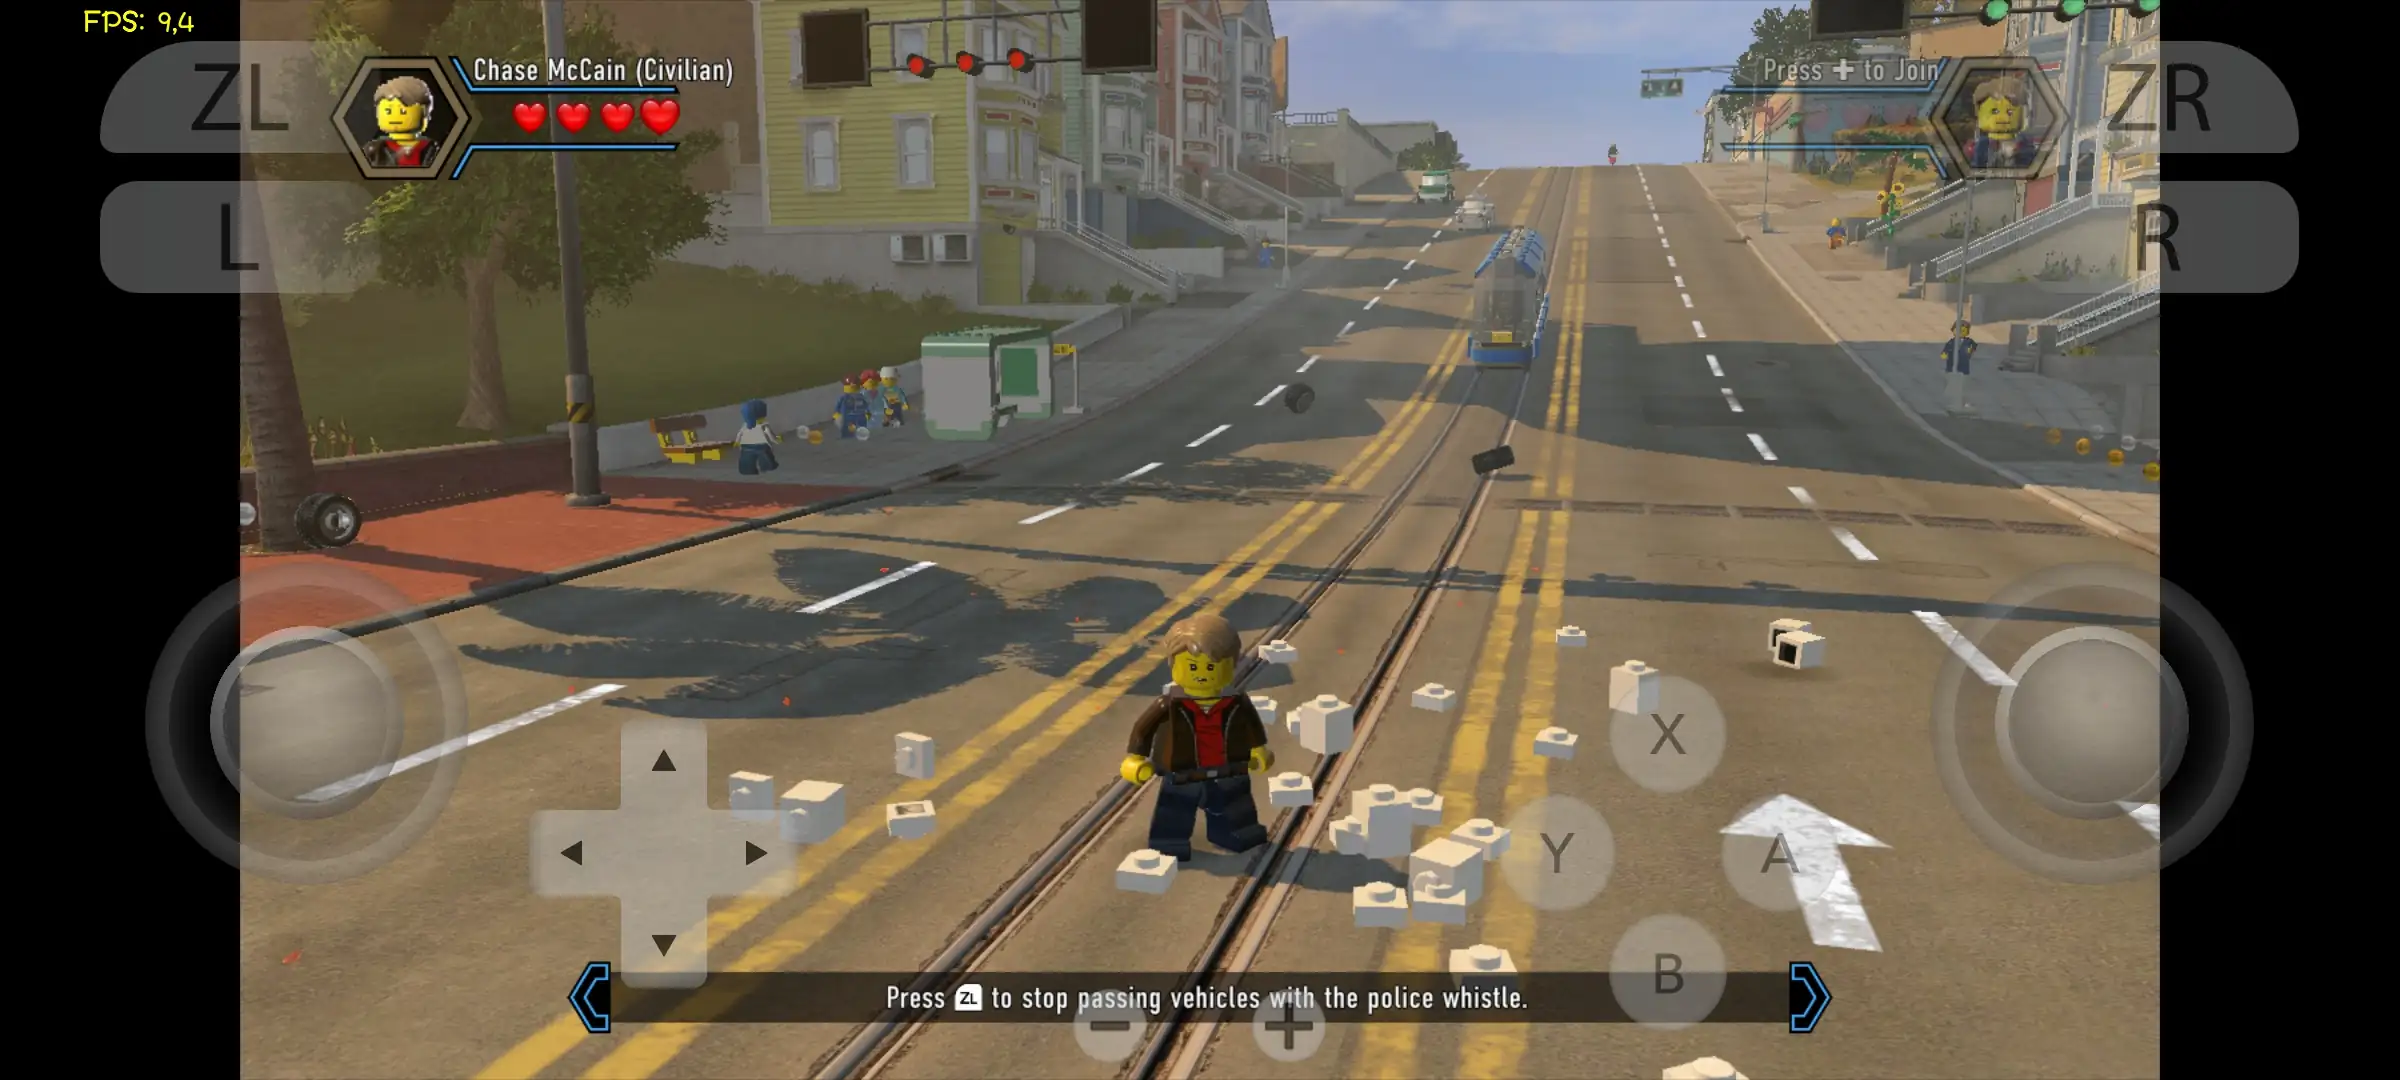 Lego City Undercover Android Download - Yuzu Android Emulator - APK + OBB